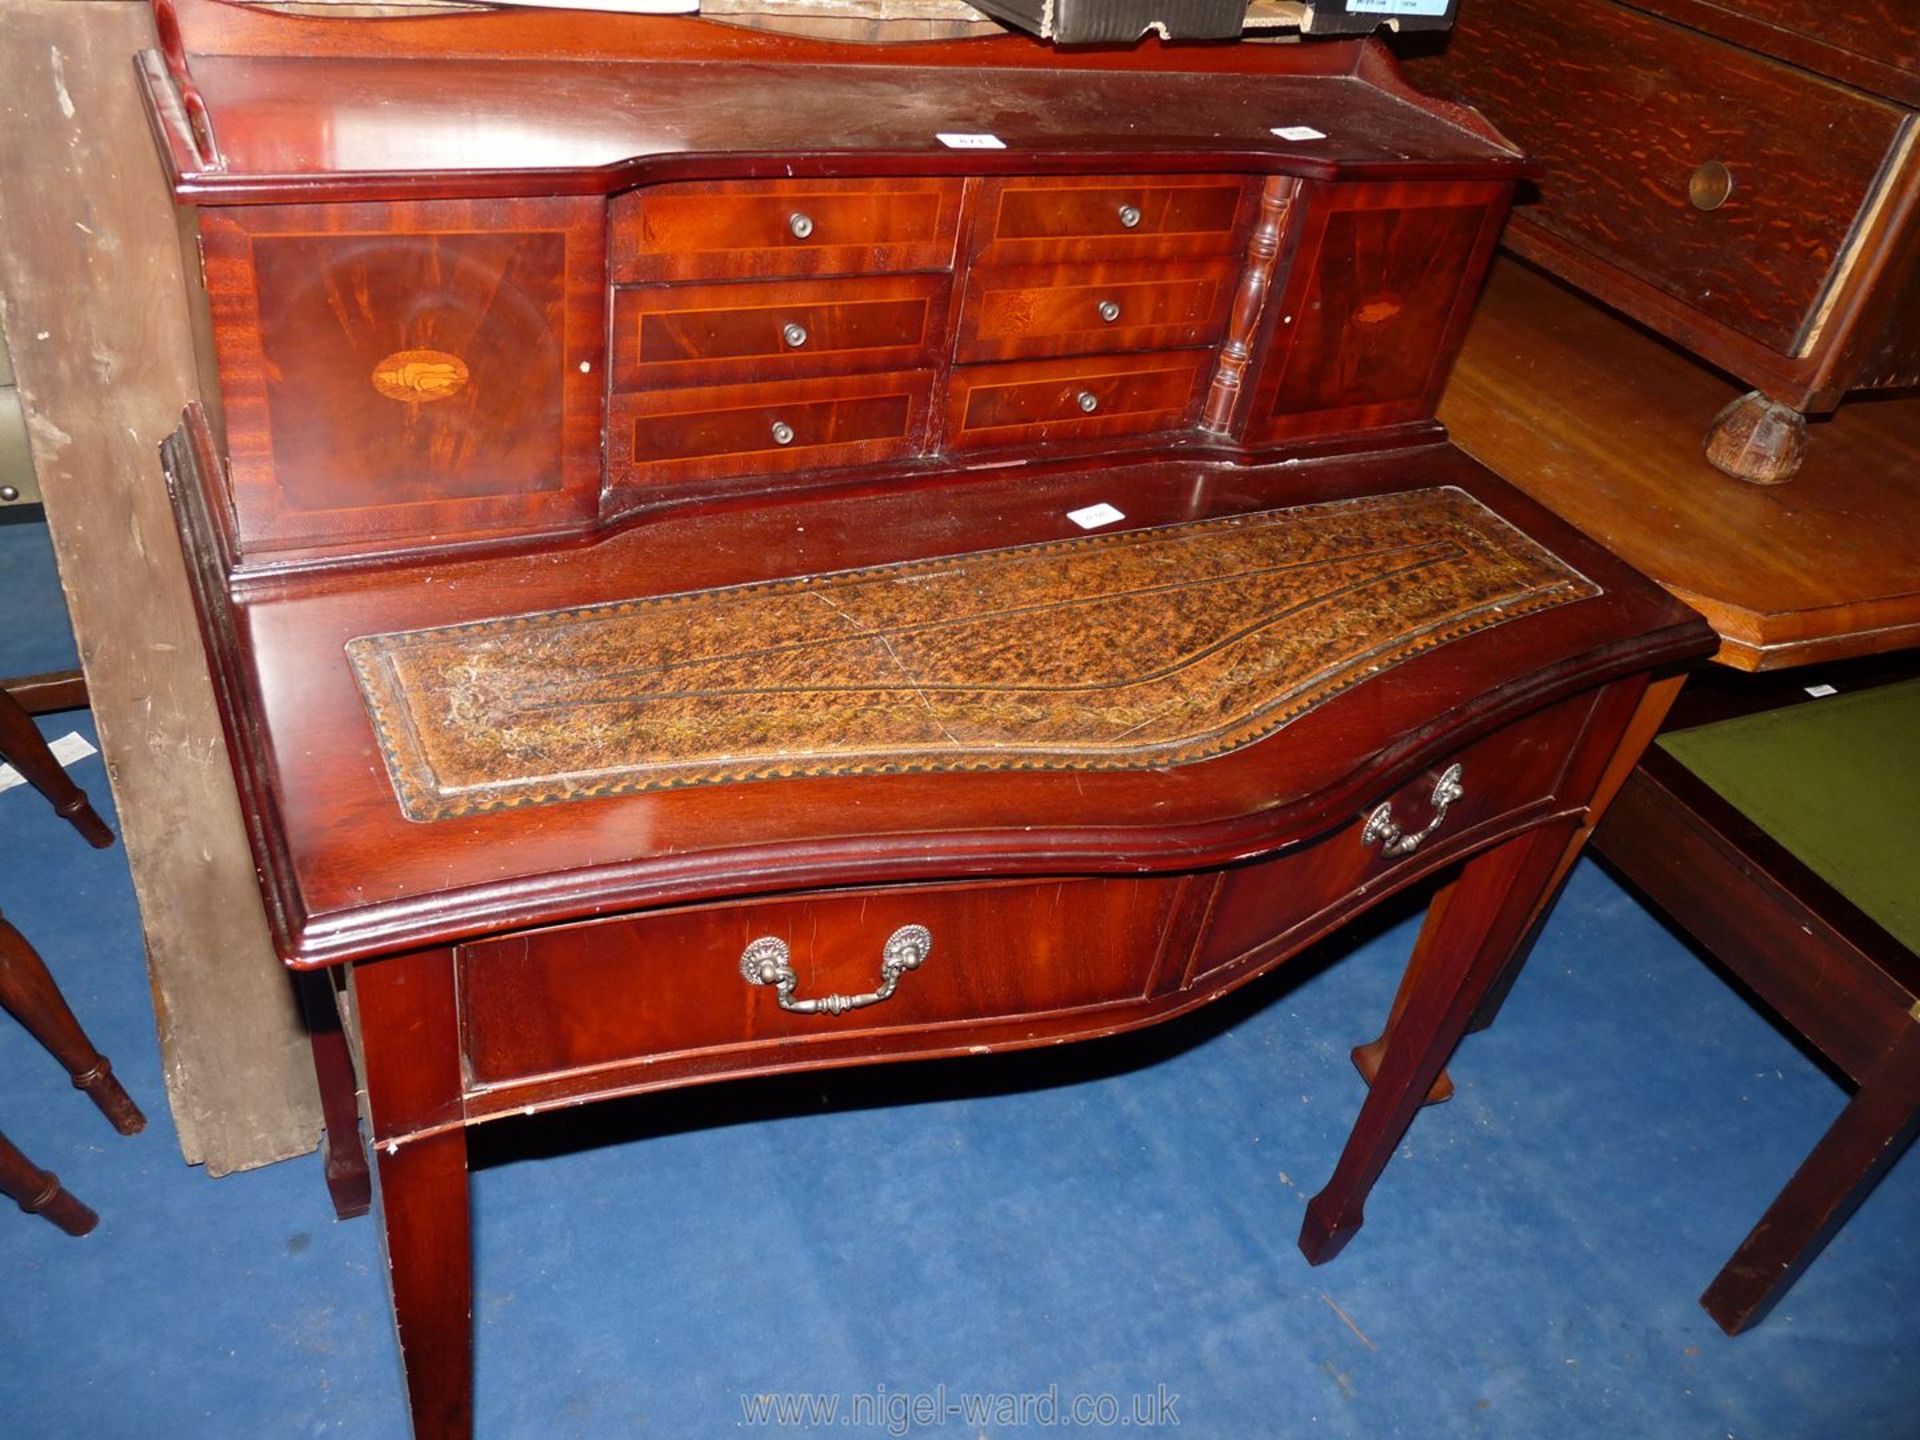 A repro writing desk with tooled leather insert, 36" wide x 40" high x 19" deep.